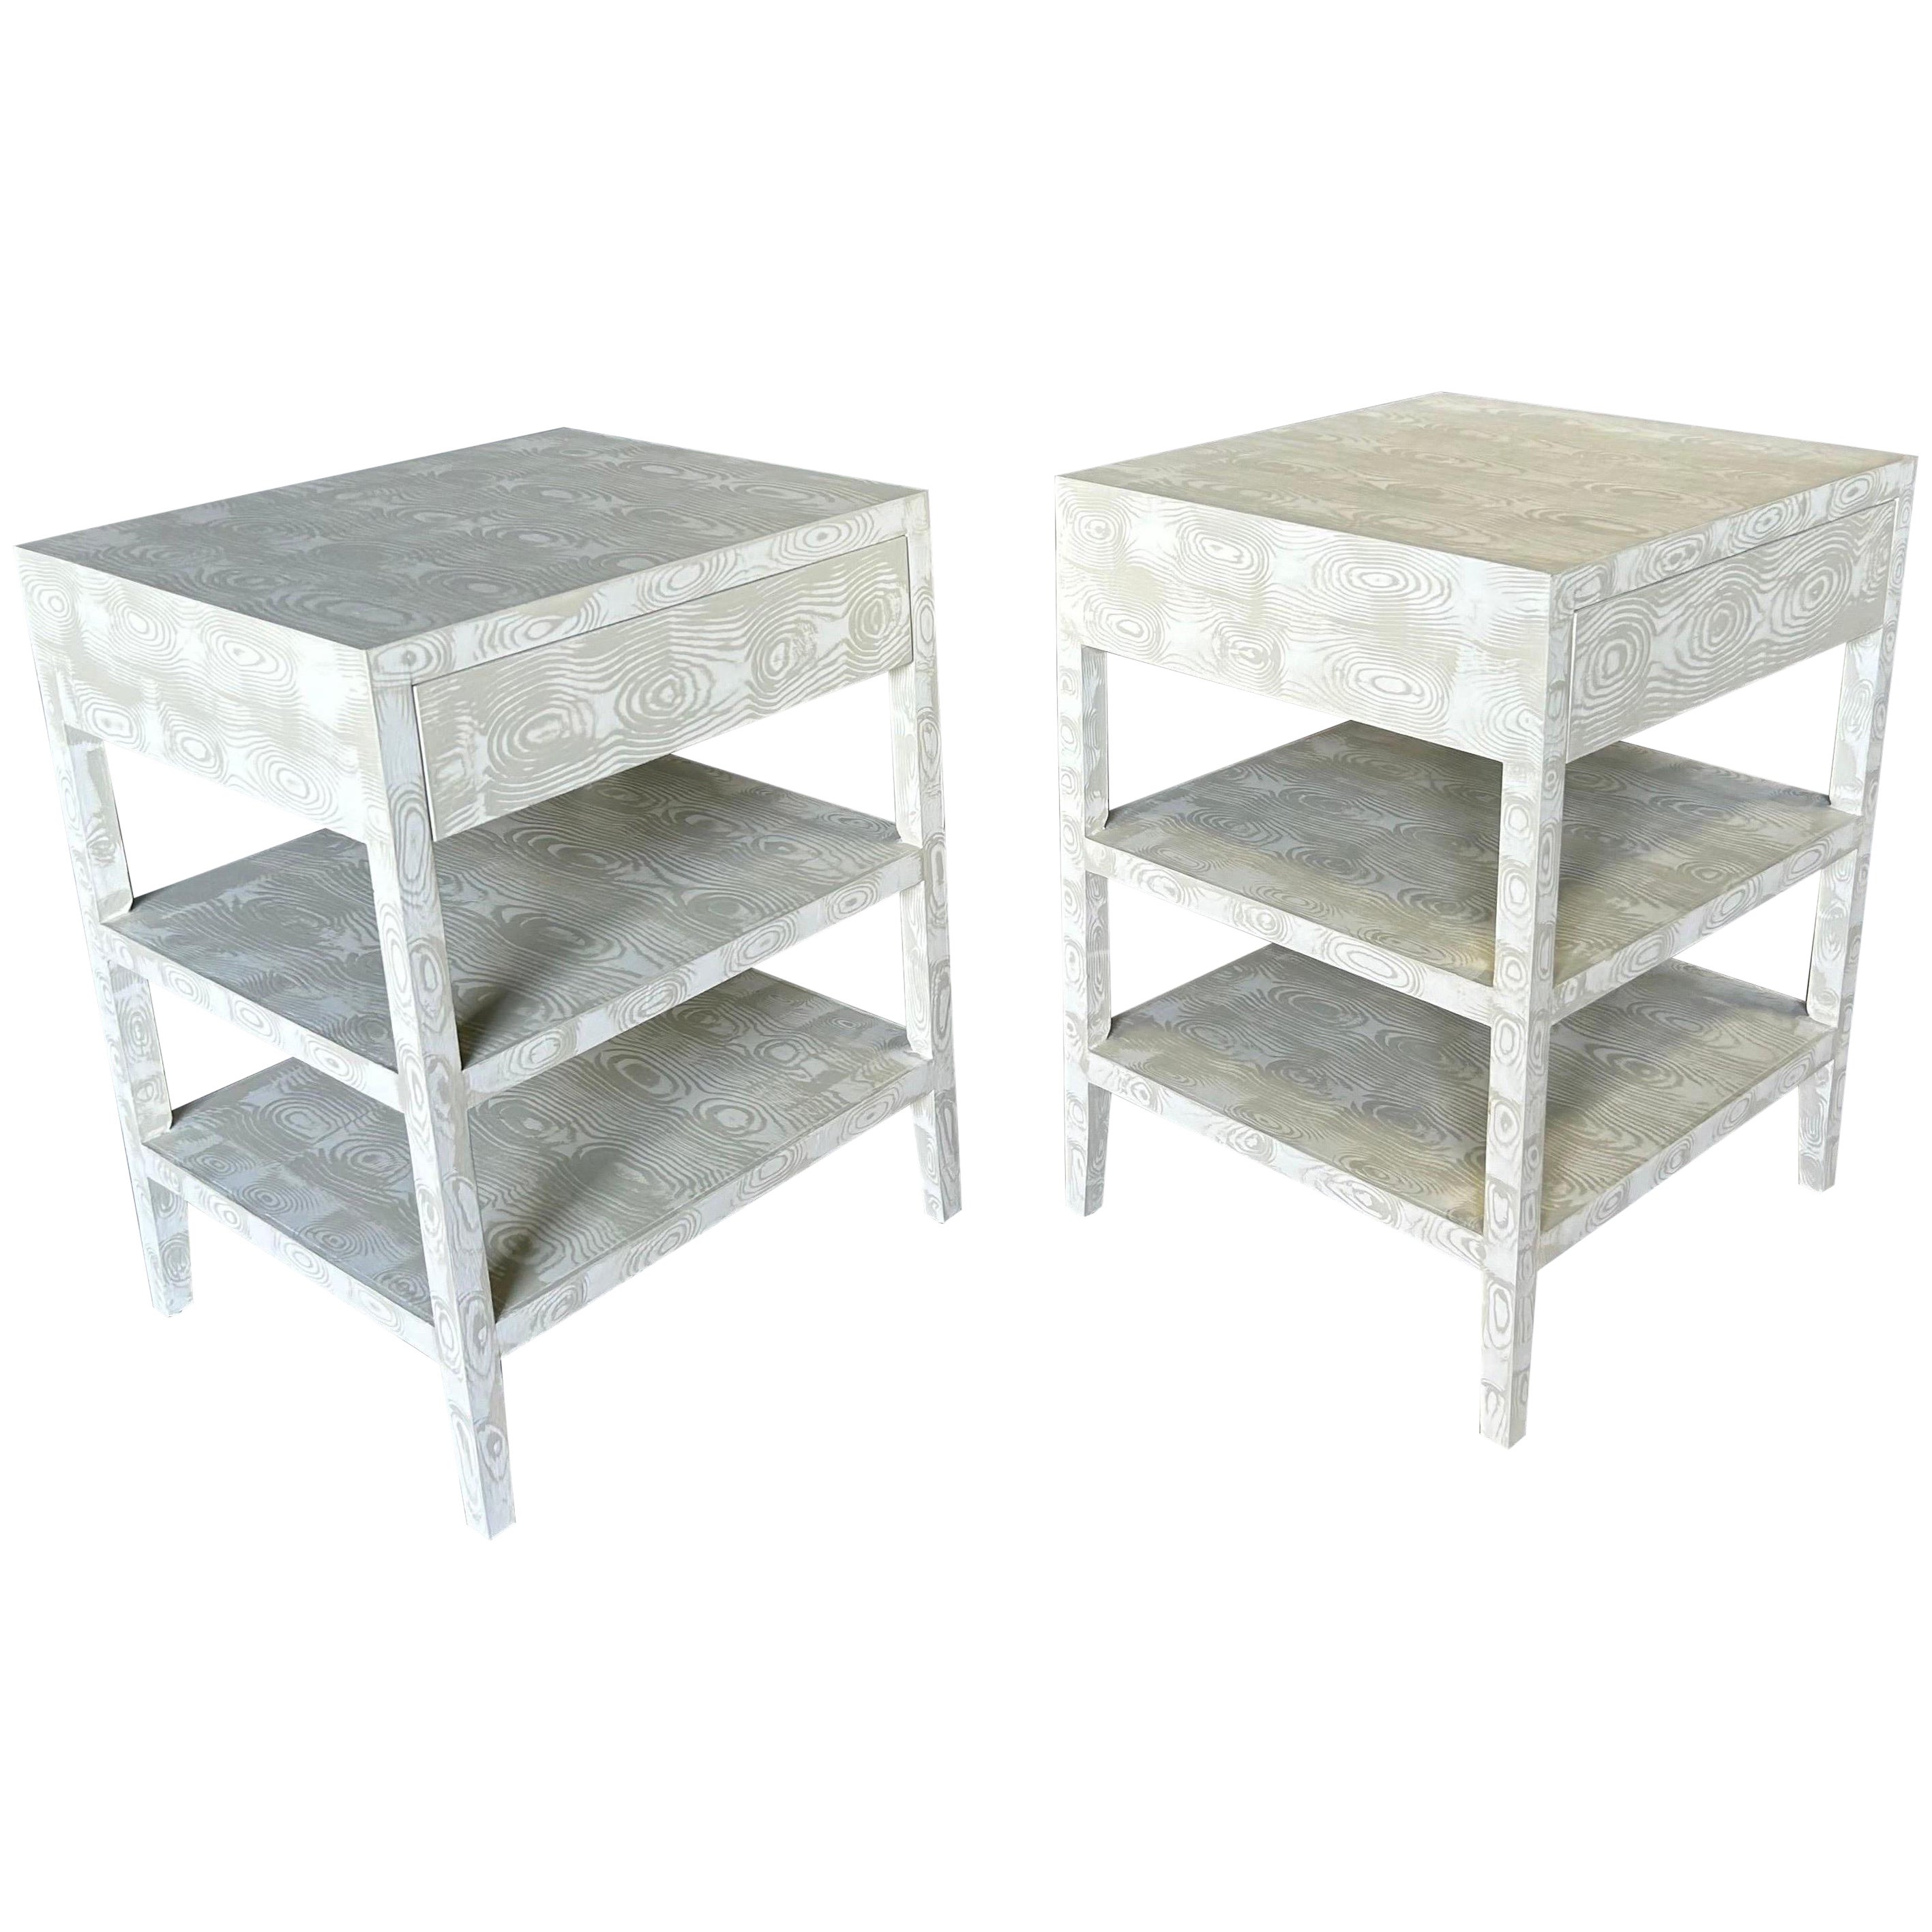 Caroline End Table with Drawer in Edgecomb Gray Faux Bois by The Fabulous Things For Sale